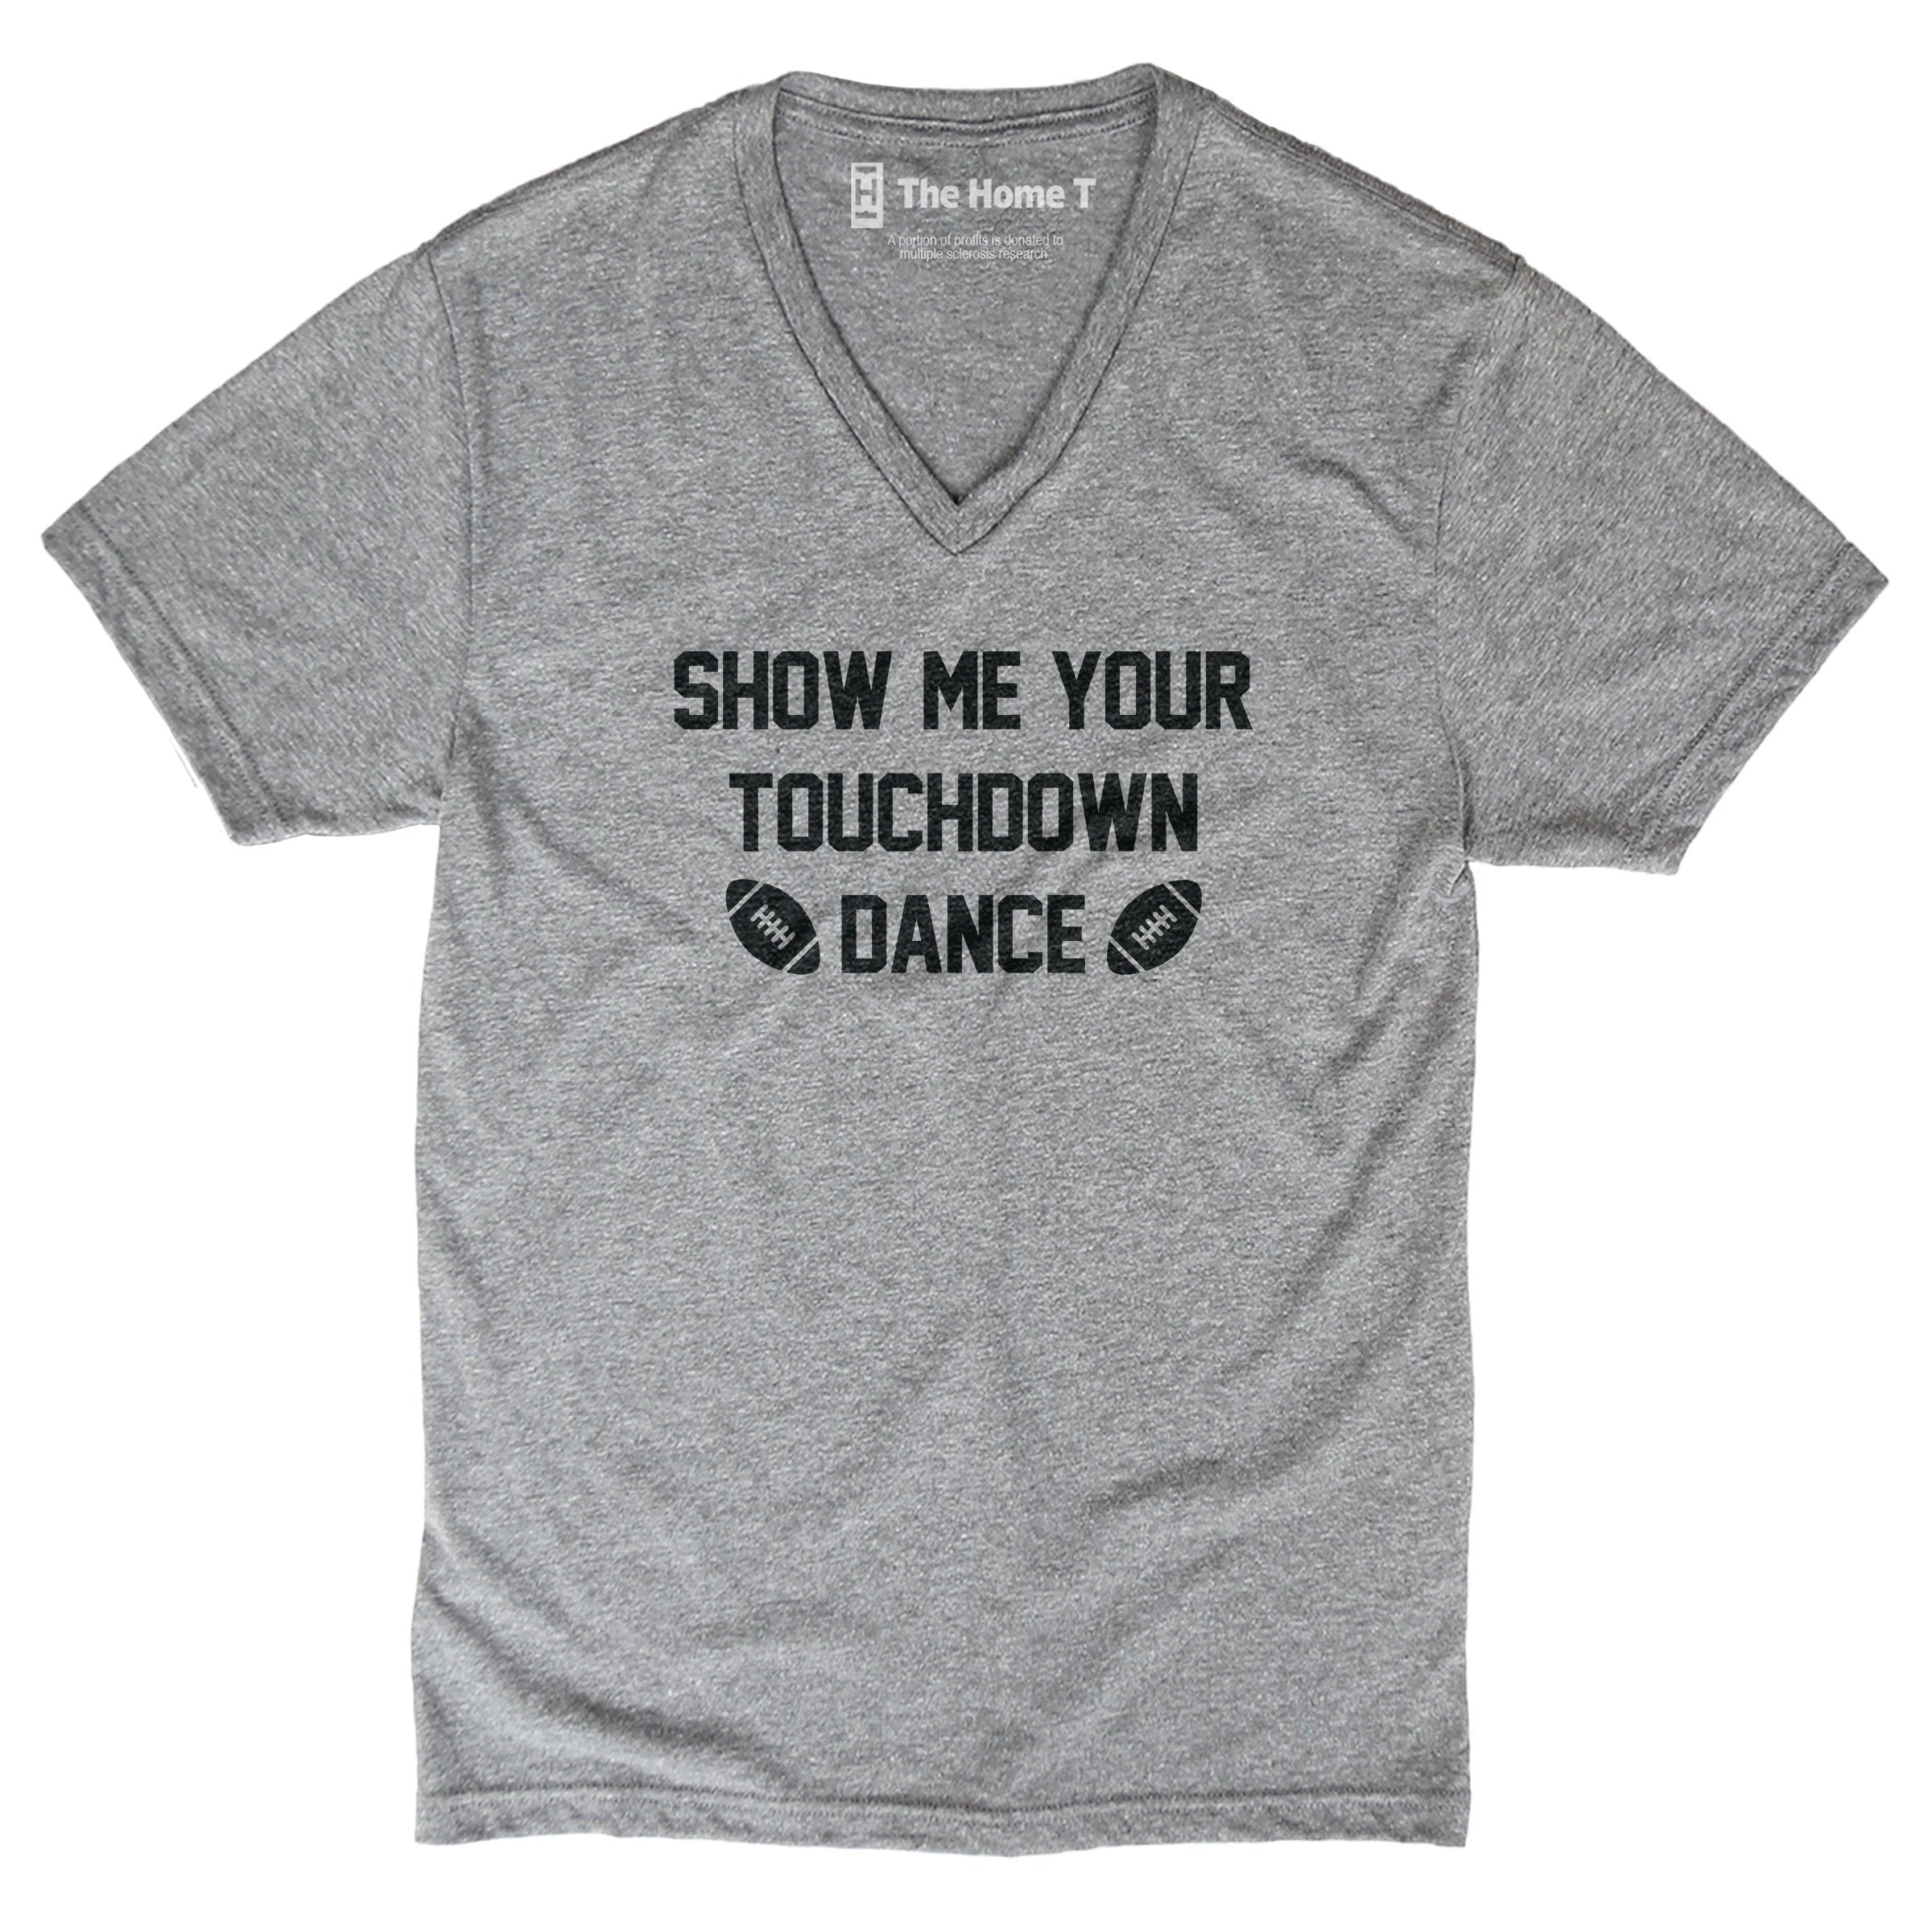 Touchdown Dance Crew neck The Home T XS V-Neck